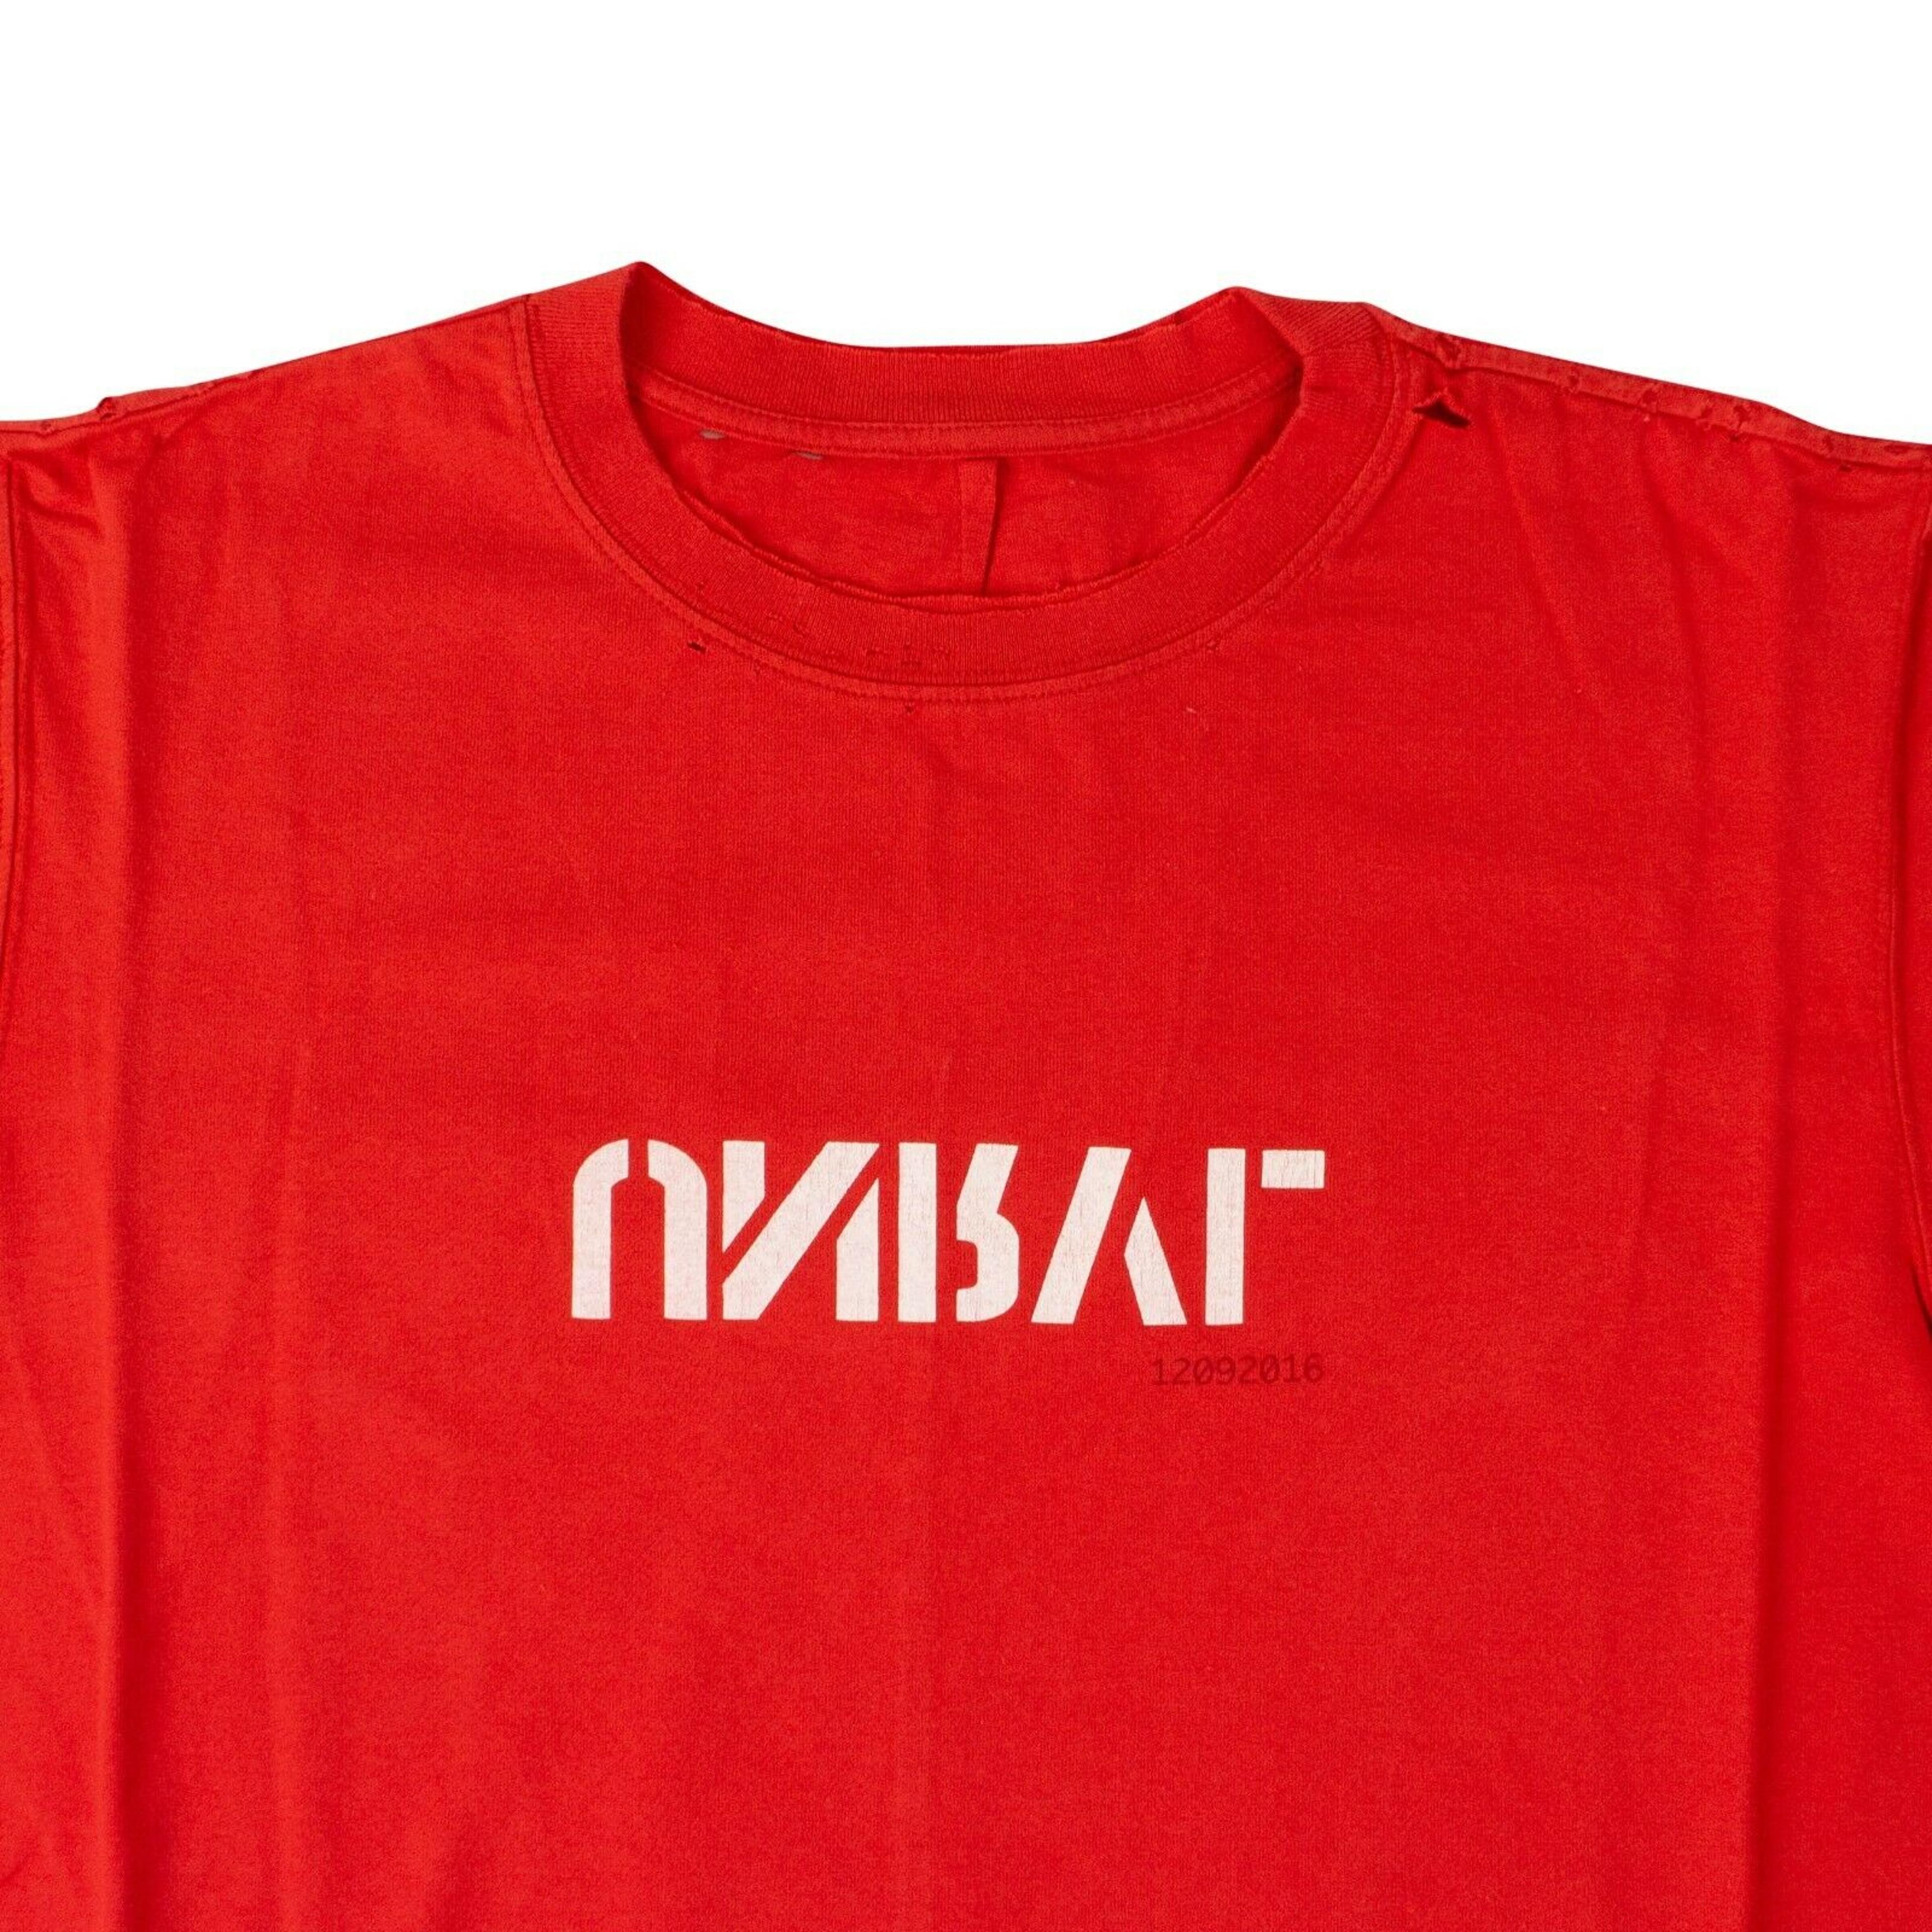 Alternate View 1 of Unravel Project Slogan Print T-Shirt - Red